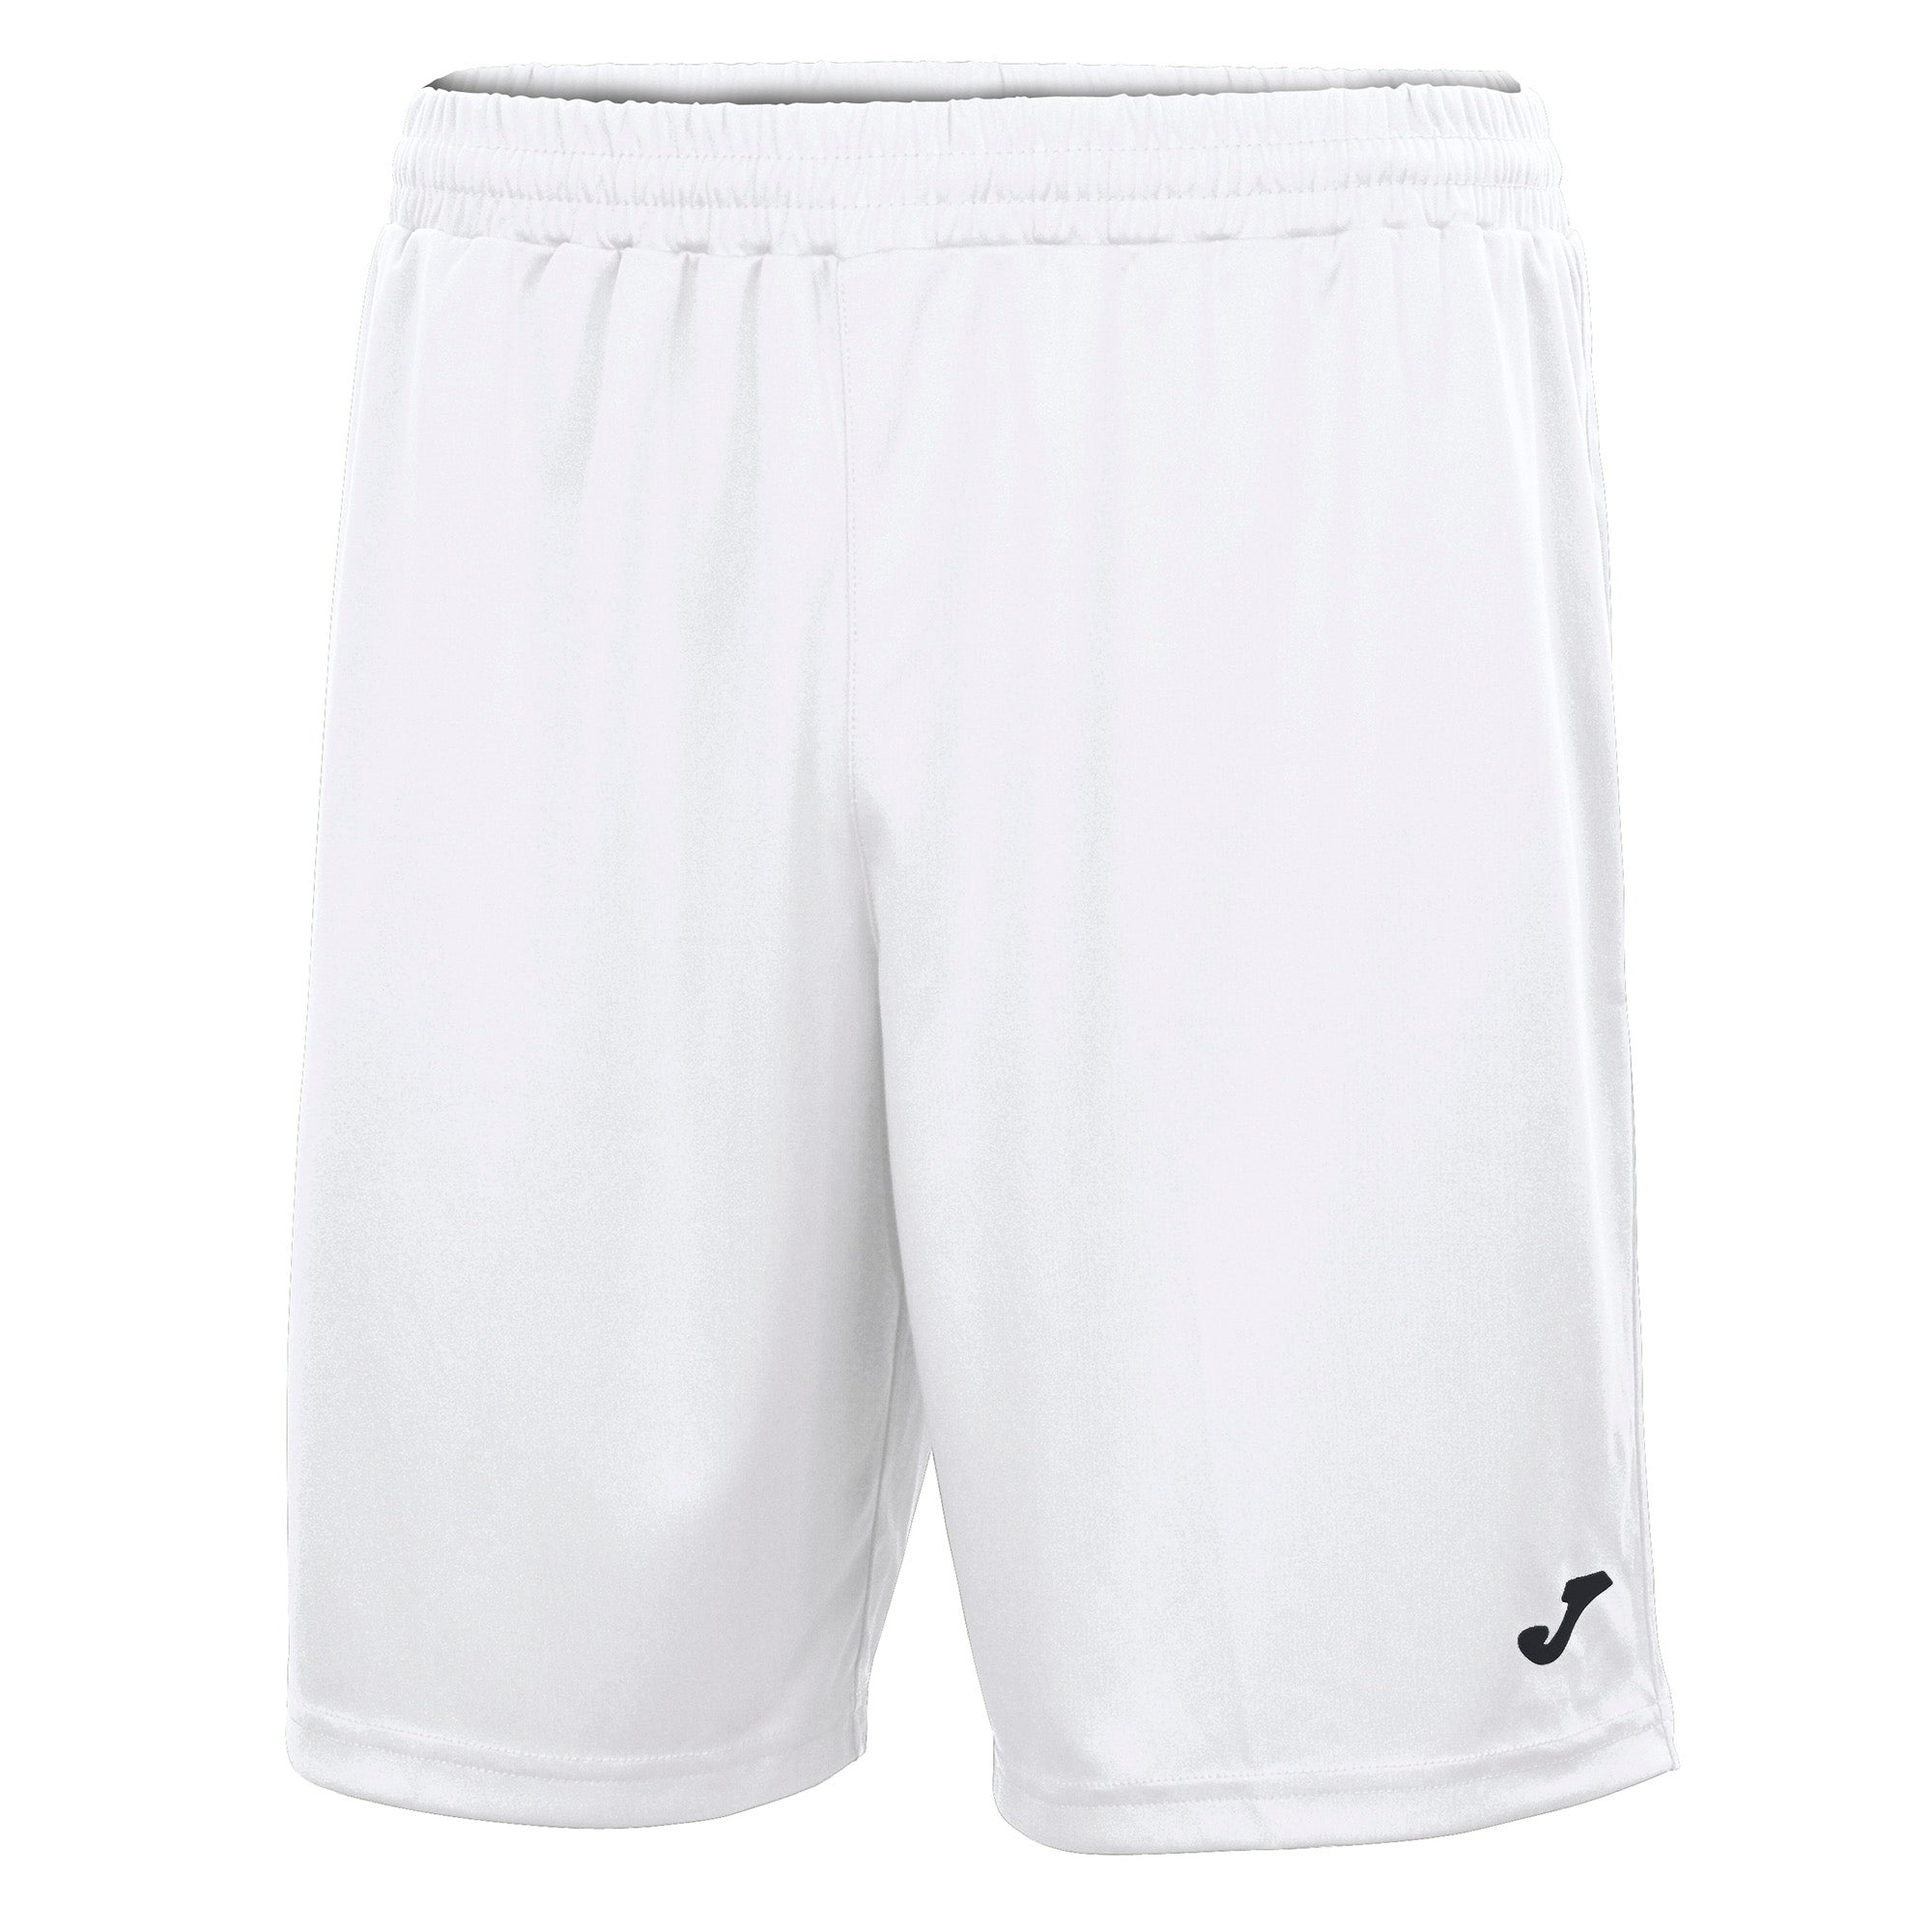 BARCA MA/VA Game Replacement Shorts - White